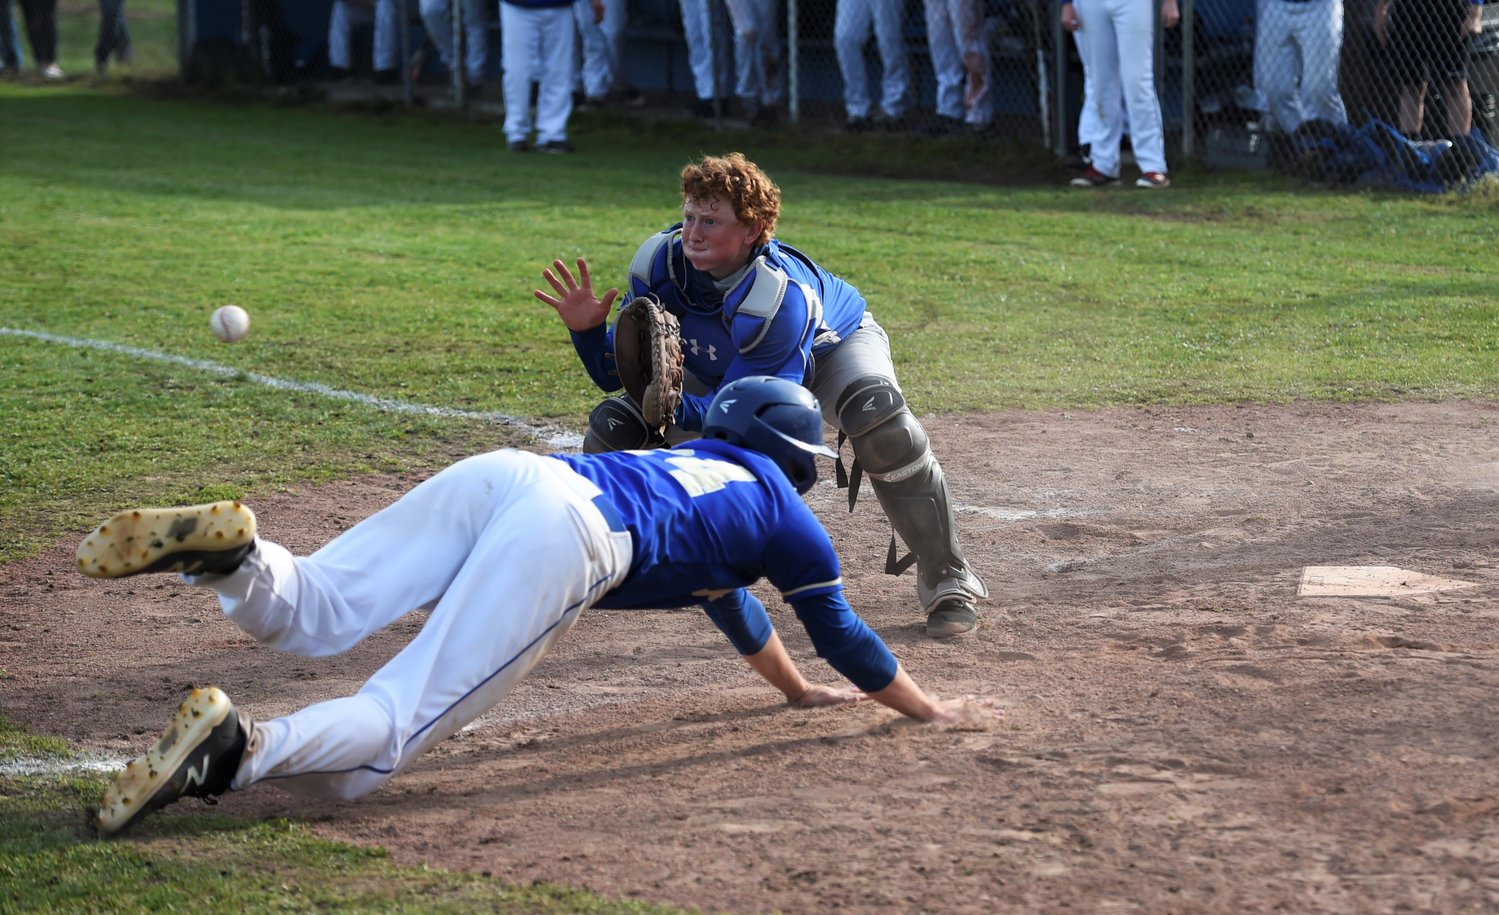 Adna senior Levi Gates slides head-first into home plate against Toutle Lake in the district semifinals on Thursday in Toutle.